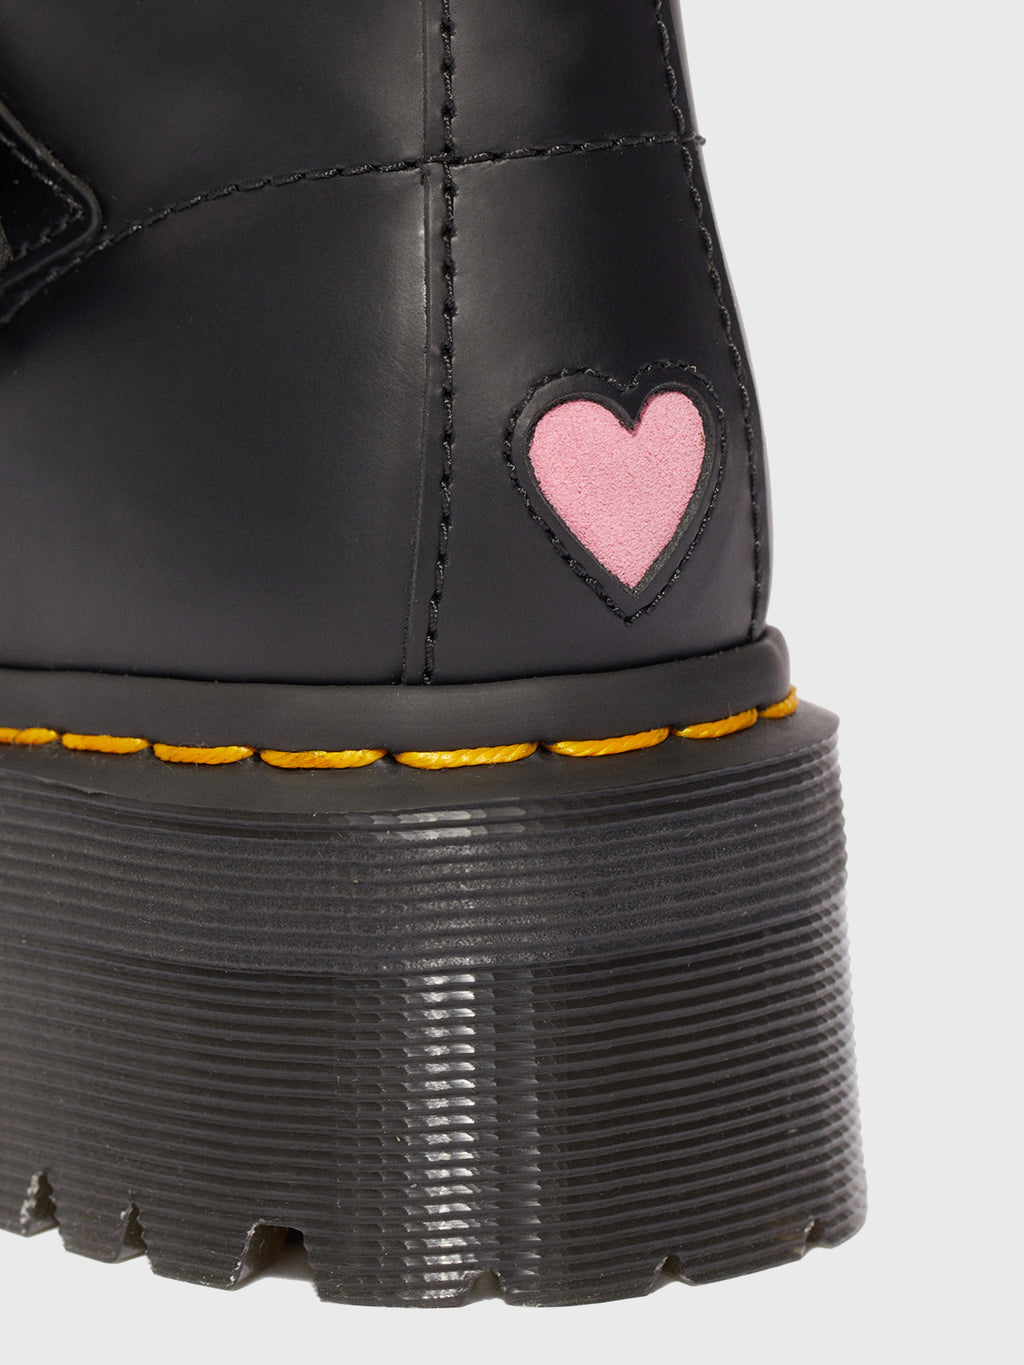 Dr. Martens x Lazy Oaf Buckle Boot